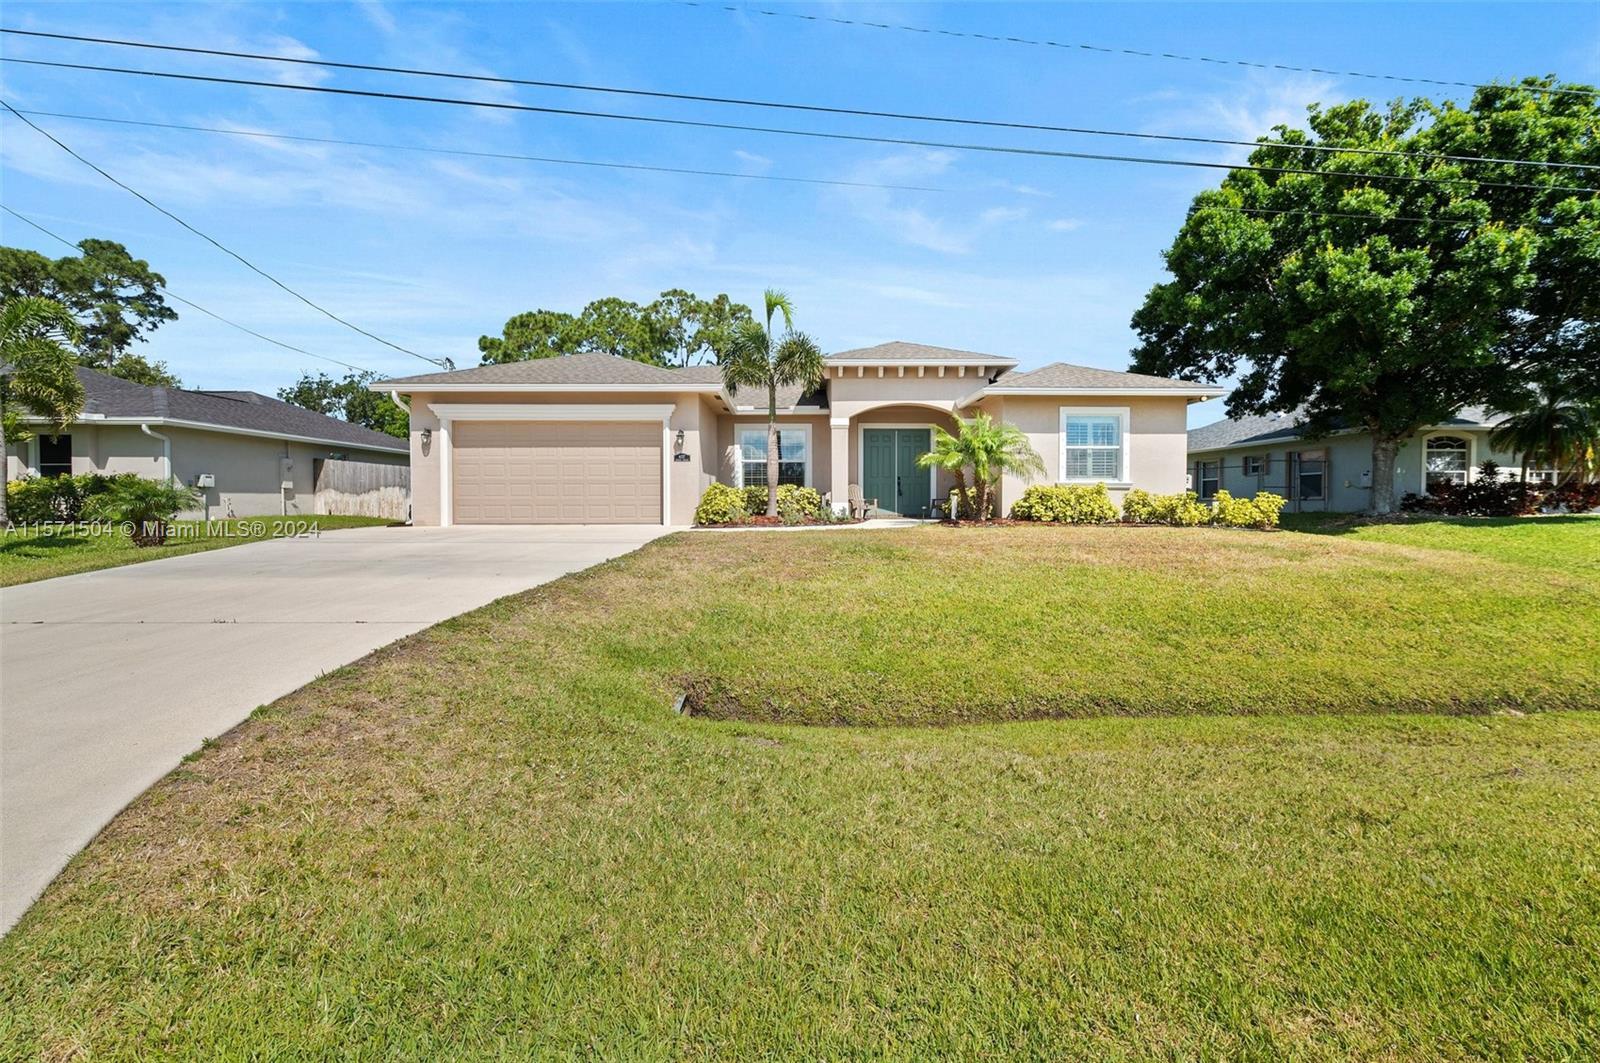 Photo of 6137 NW Densaw Ter in Port St Lucie, FL